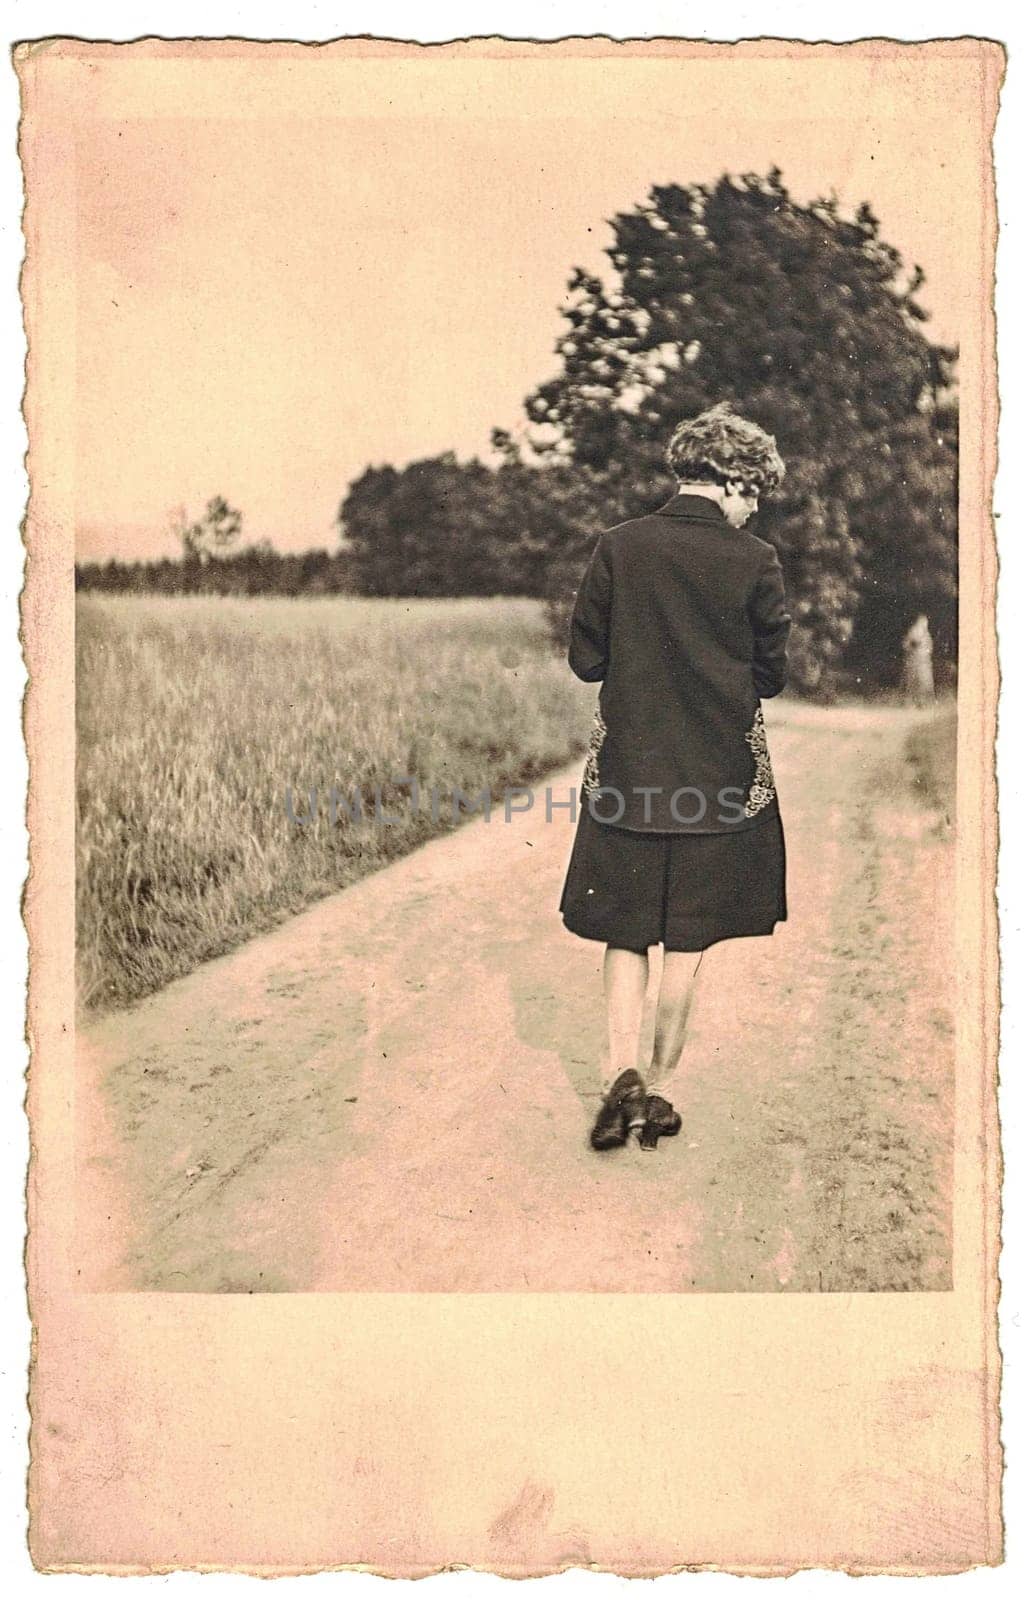 GERMANY - CIRCA 1960s: Retro photo shows woman goes for a walk. Black and white photography from the golden sixties.